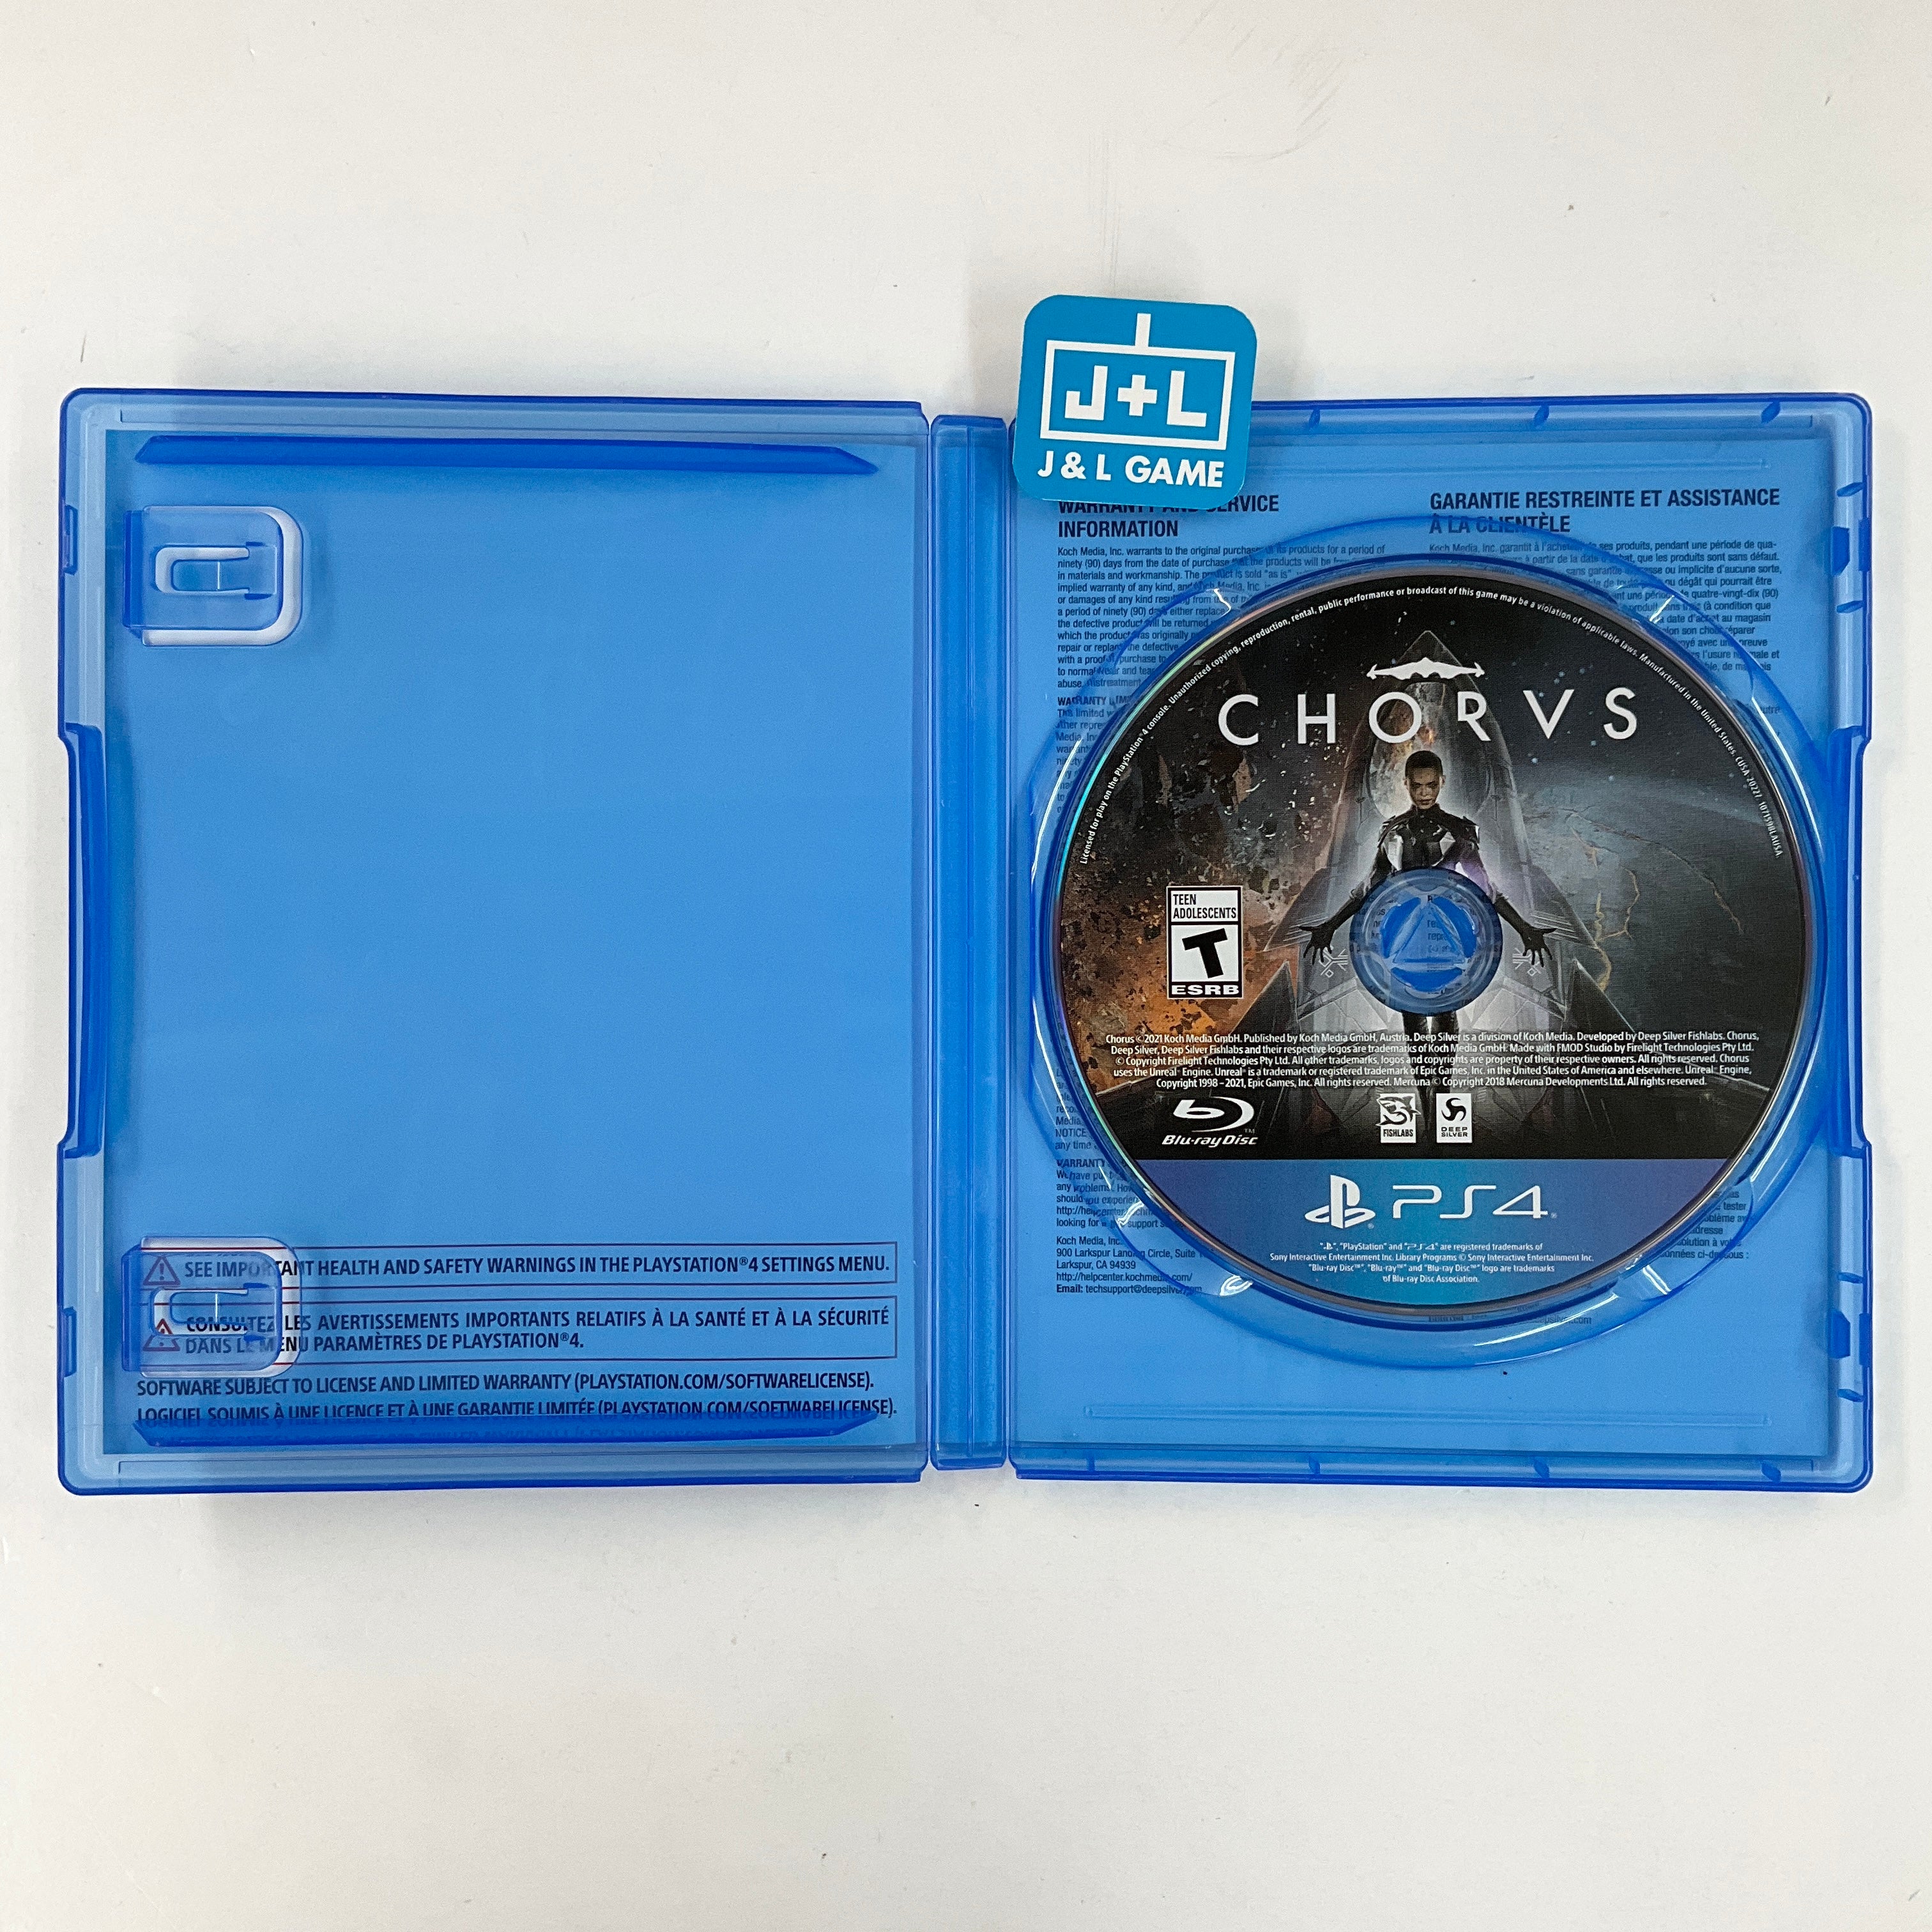 Chorus - (PS4) PlayStation 4 [UNBOXING] Video Games Deep Silver   